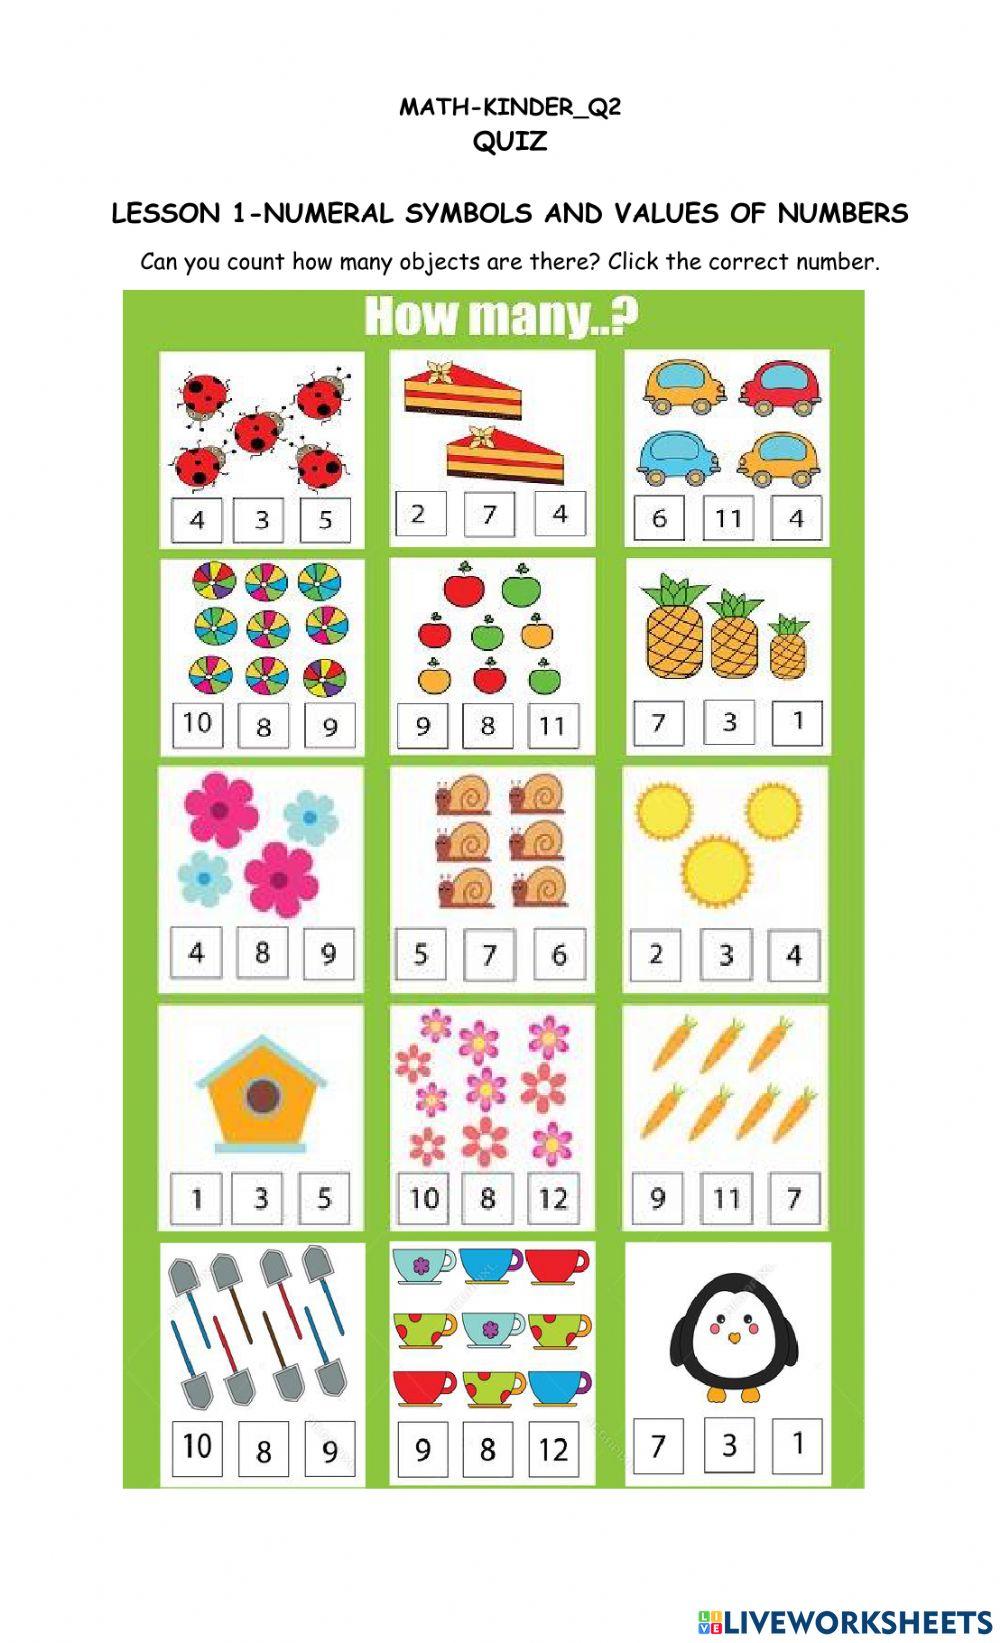 Numeral Symbols and Number Words